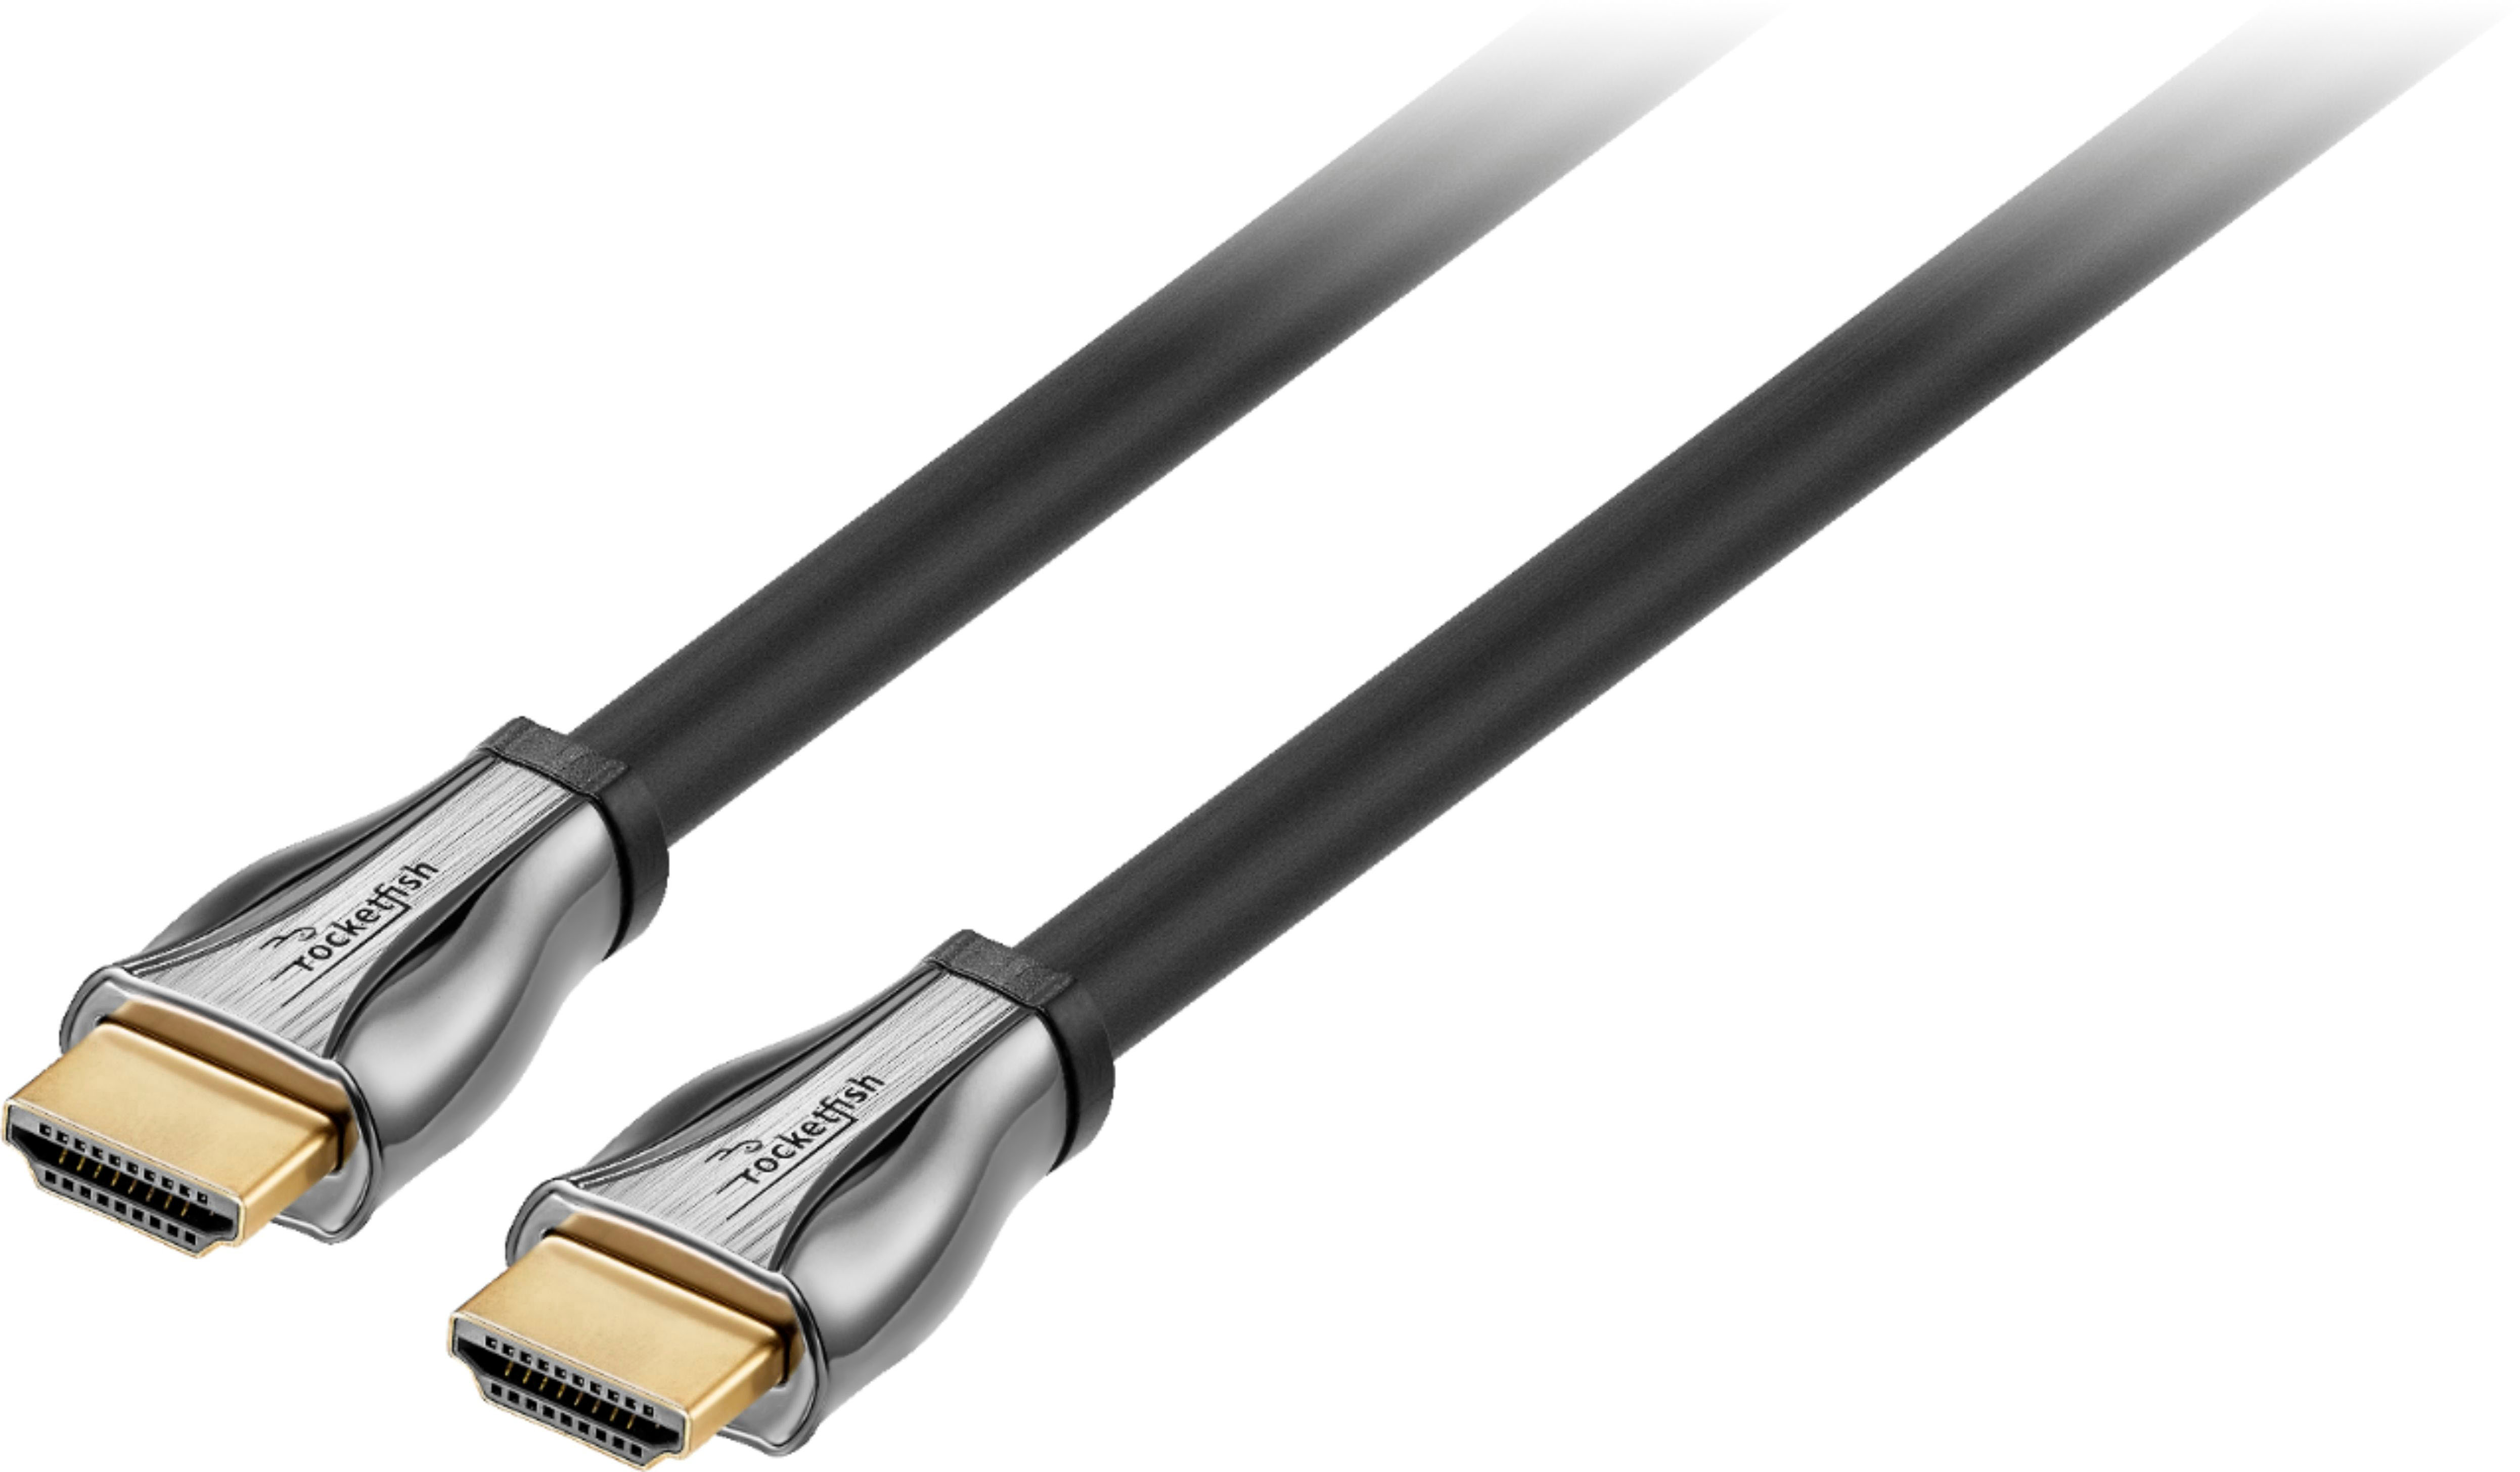 8k HDMI Cable - 8K 60 HDMI 2.1 Cable CL3 Rated